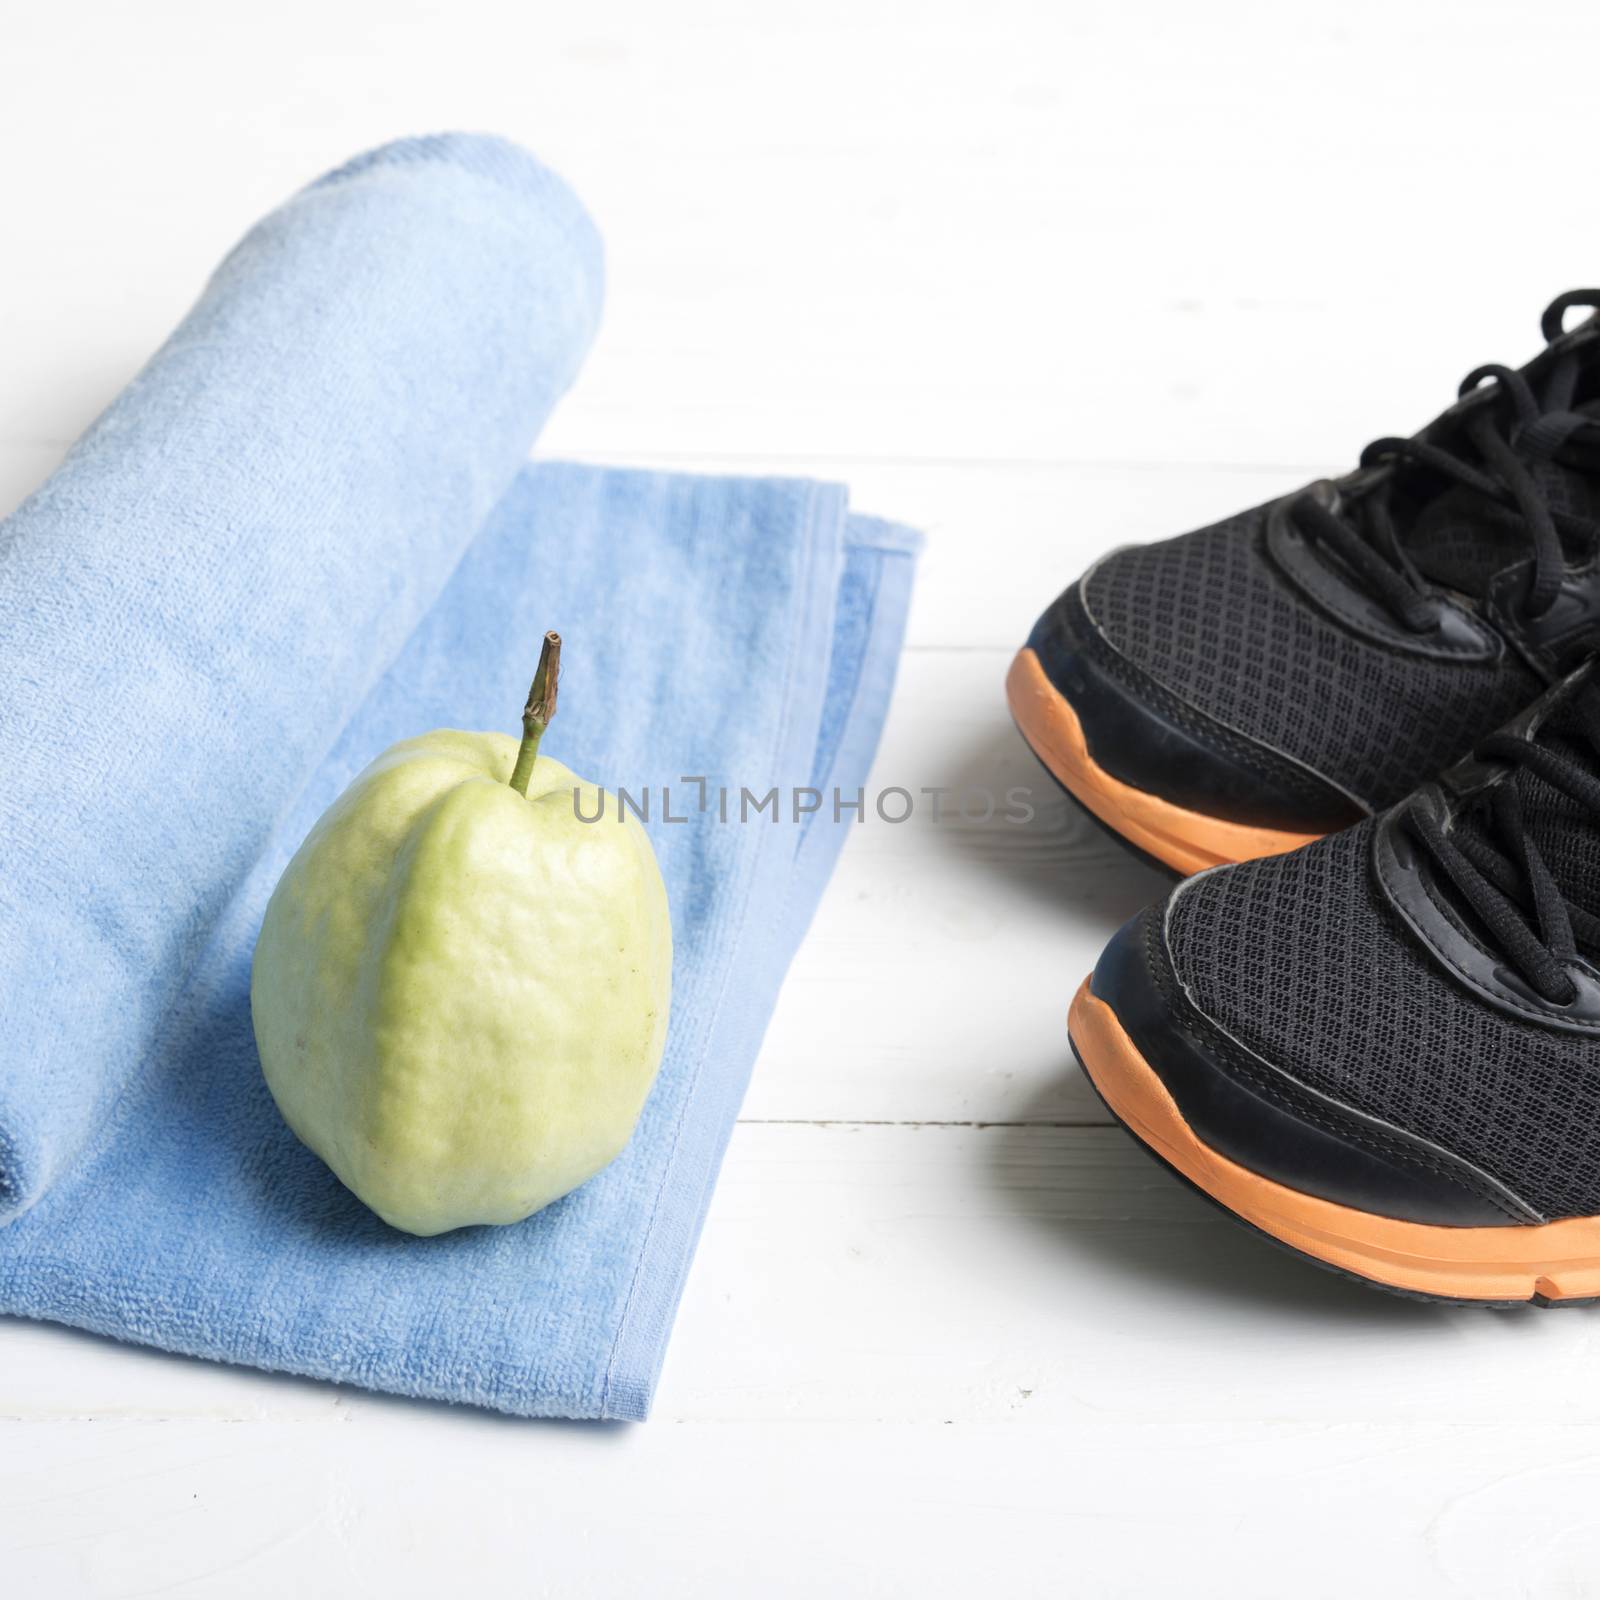 fitness equipment : running shoes,blue towel and guava fruit on white wood table